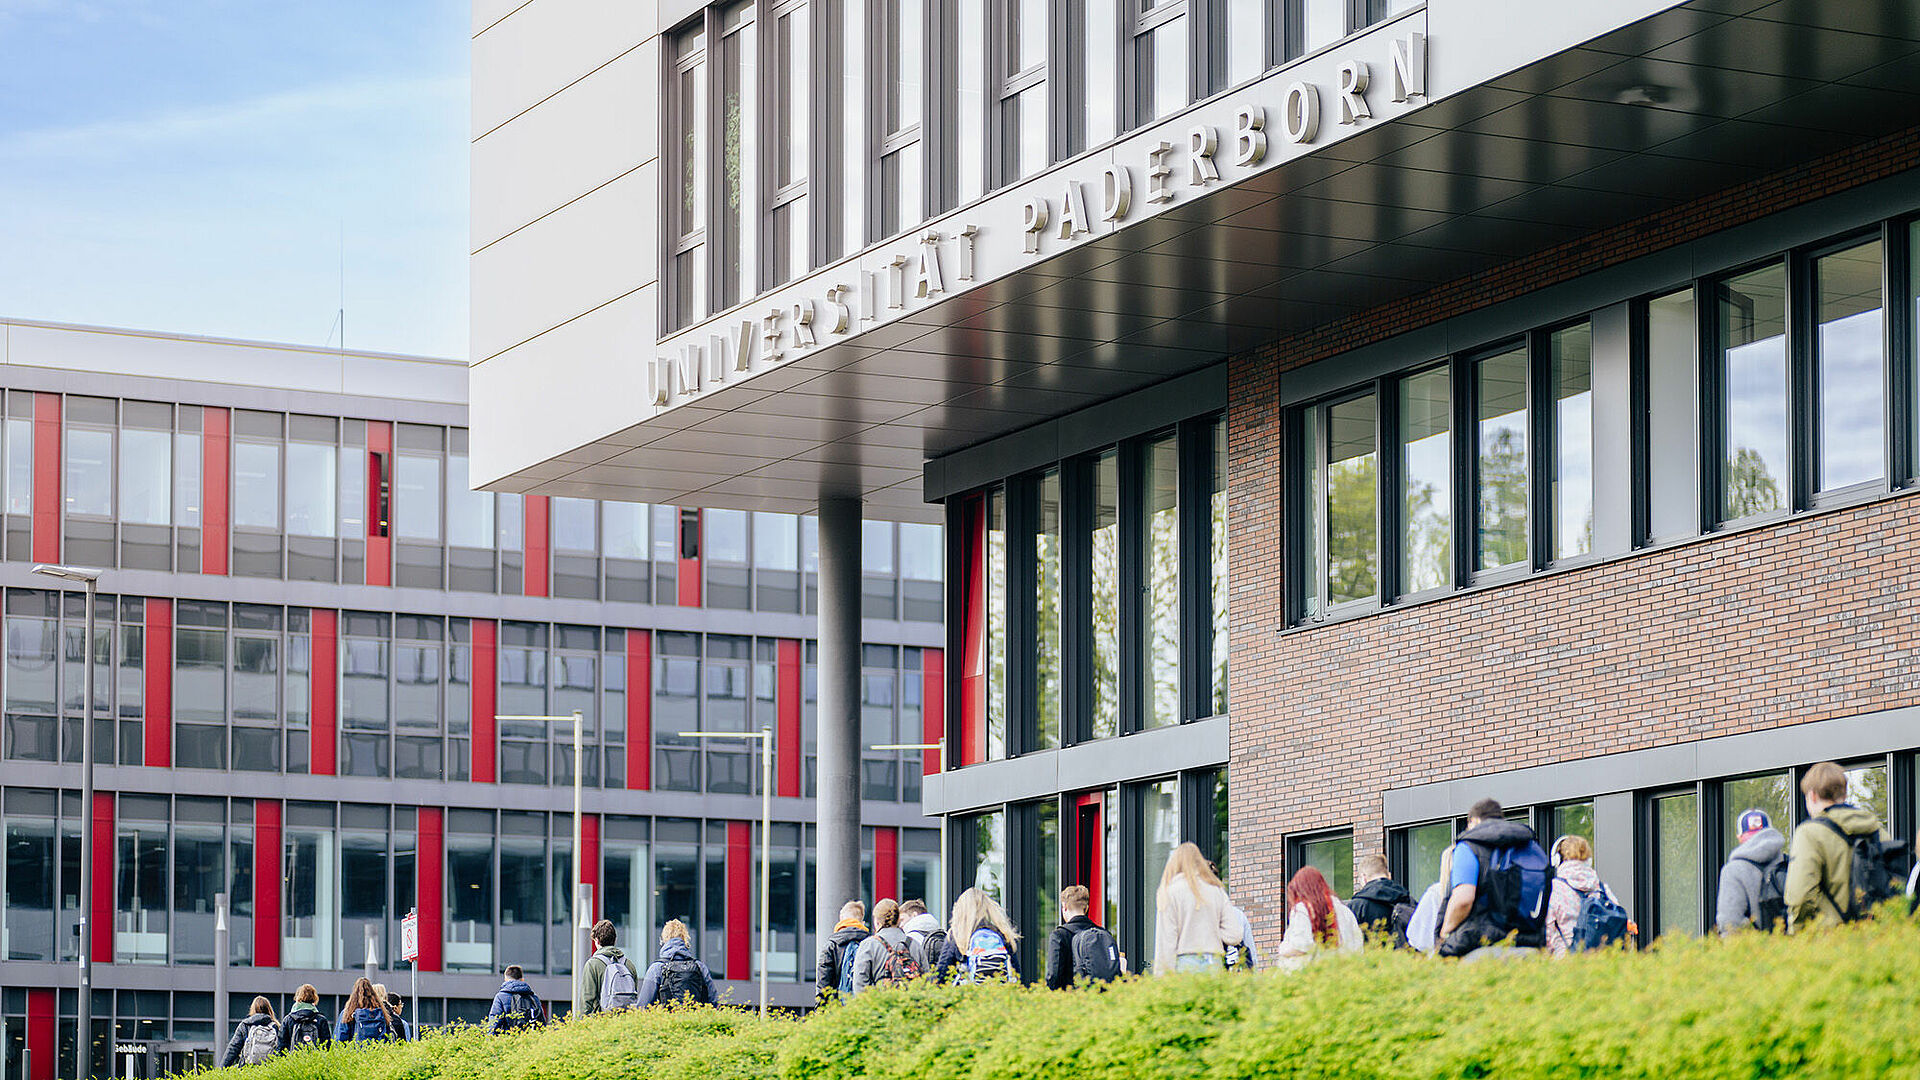 In the foreground, a part of building Q with the lettering "Universität Paderborn", in front of which more than 20 students are passing by; in the background, building I.